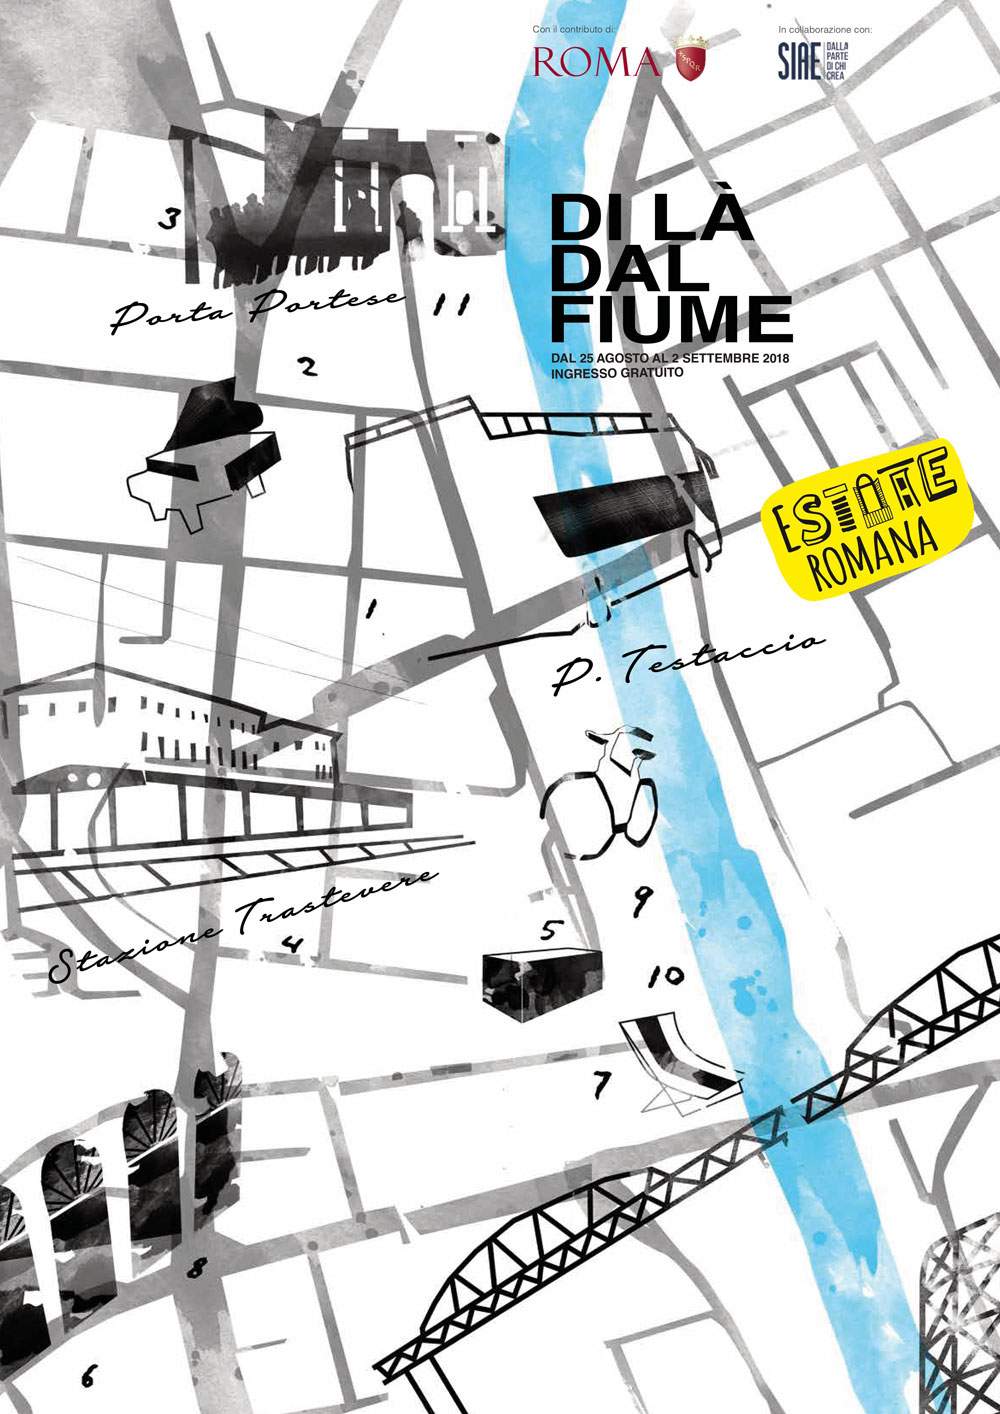 14 free events at 11 locations in Rome: first edition of Di Là Dal Fiume festival coming soon